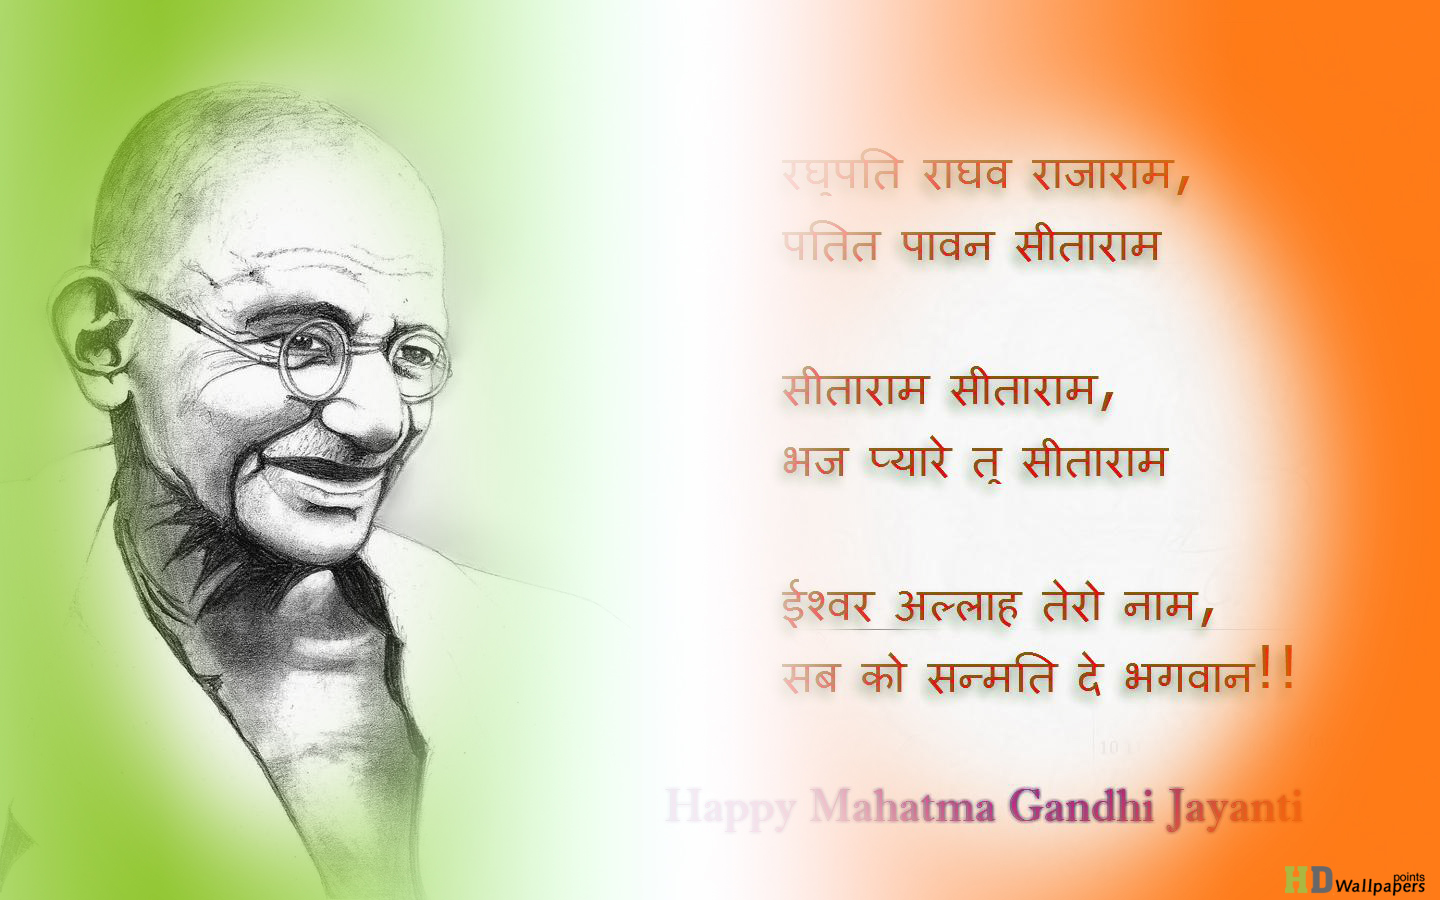 Famous Quotes By Mahatma Gandhi Images For Facebook - Mahatma Gandhi Jayanti Special , HD Wallpaper & Backgrounds